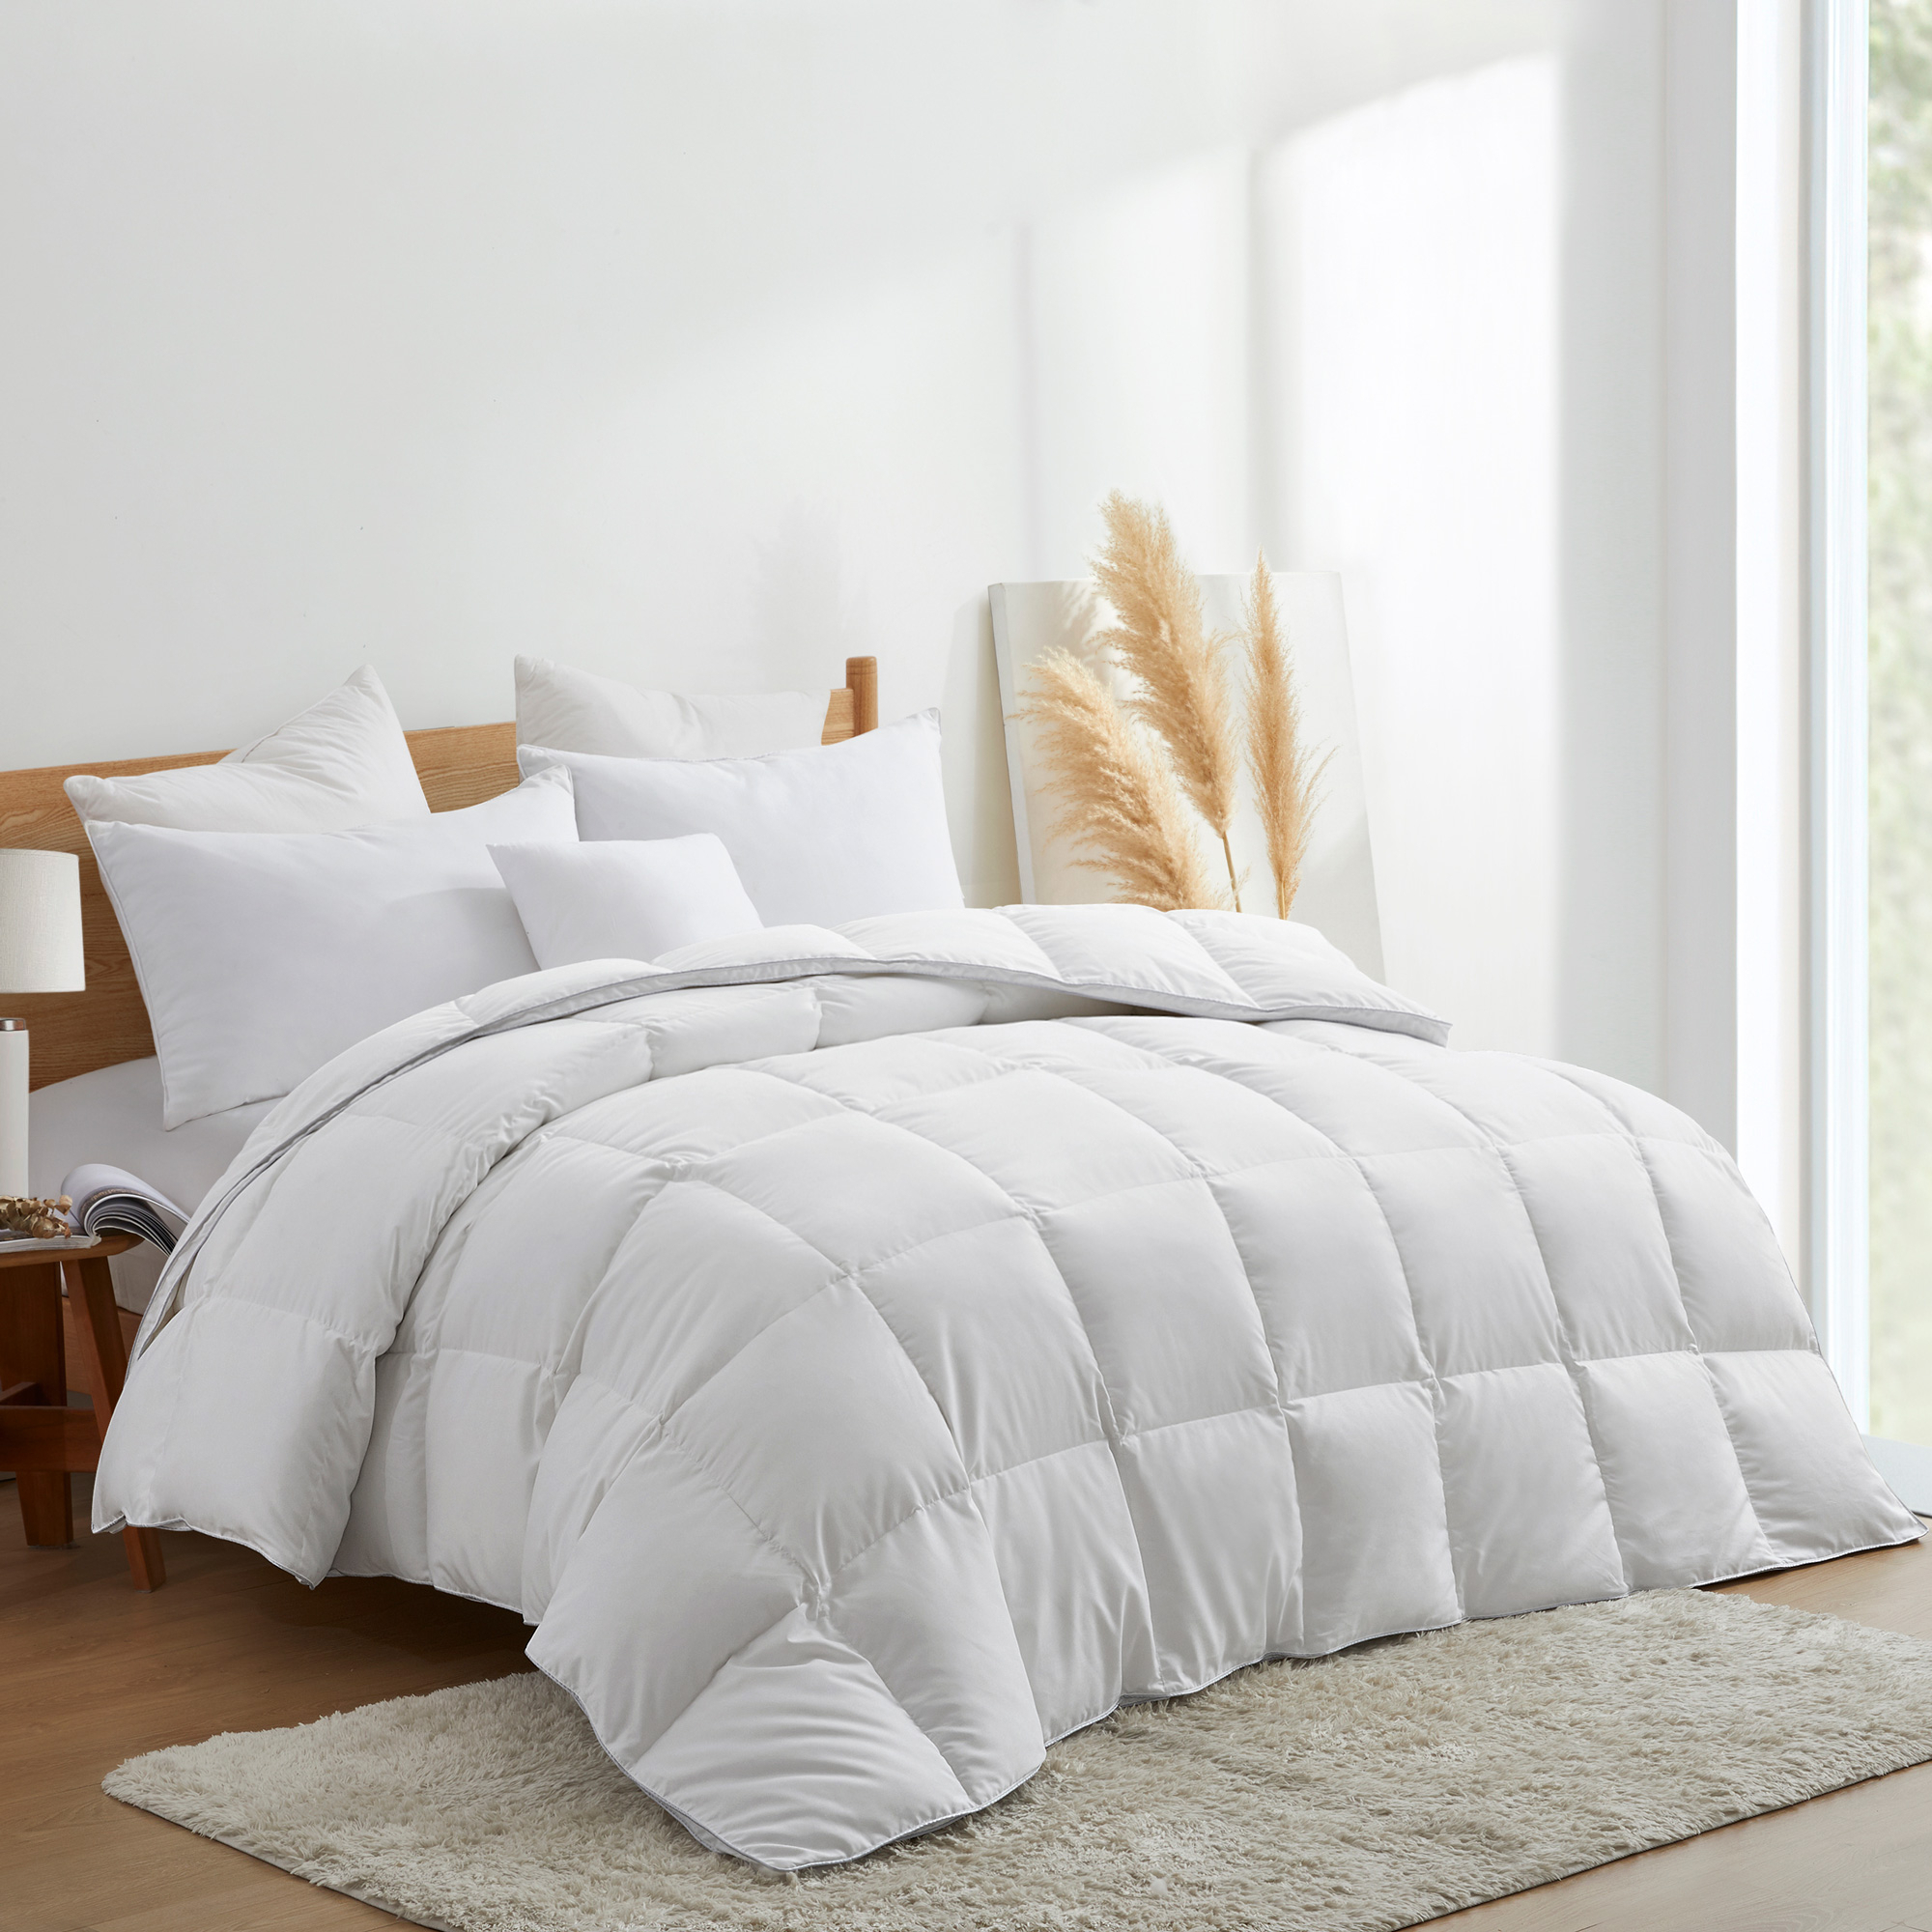 Luxurious Medium Weight White Goose Down Feathers Fiber Comforter, For All-Season Weather - Full/Queen